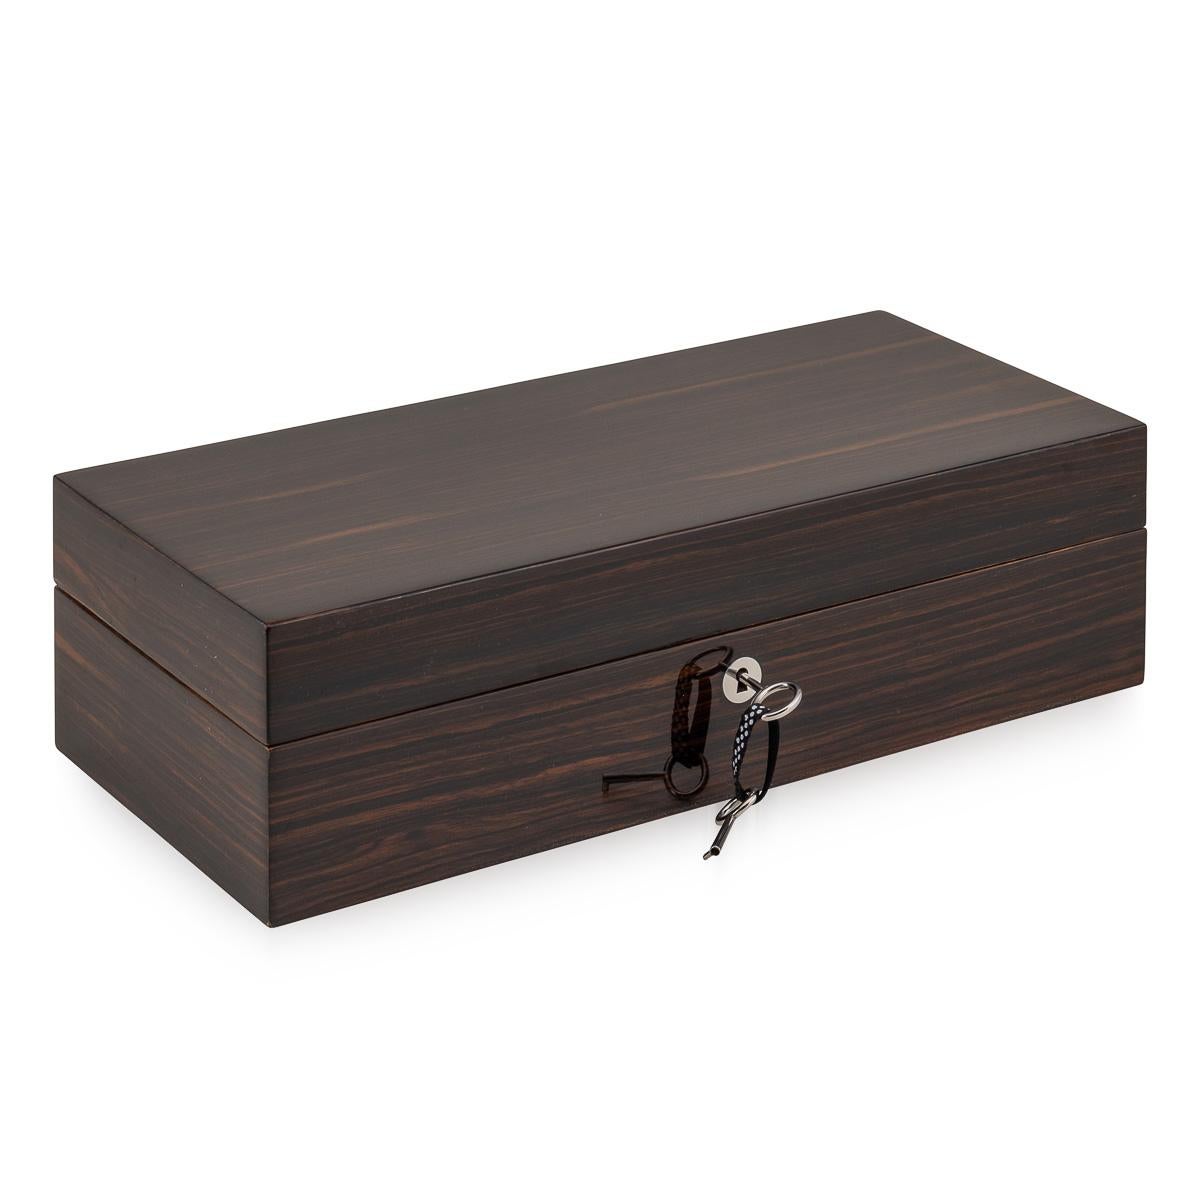 Featuring a sleek contemporary design, this watch case showcases a solid walnut carcass with stainless steel hinges & lock covered in a fine stripe macassar veneer. Upon opening, it reveals a meticulously crafted interior with four custom-made